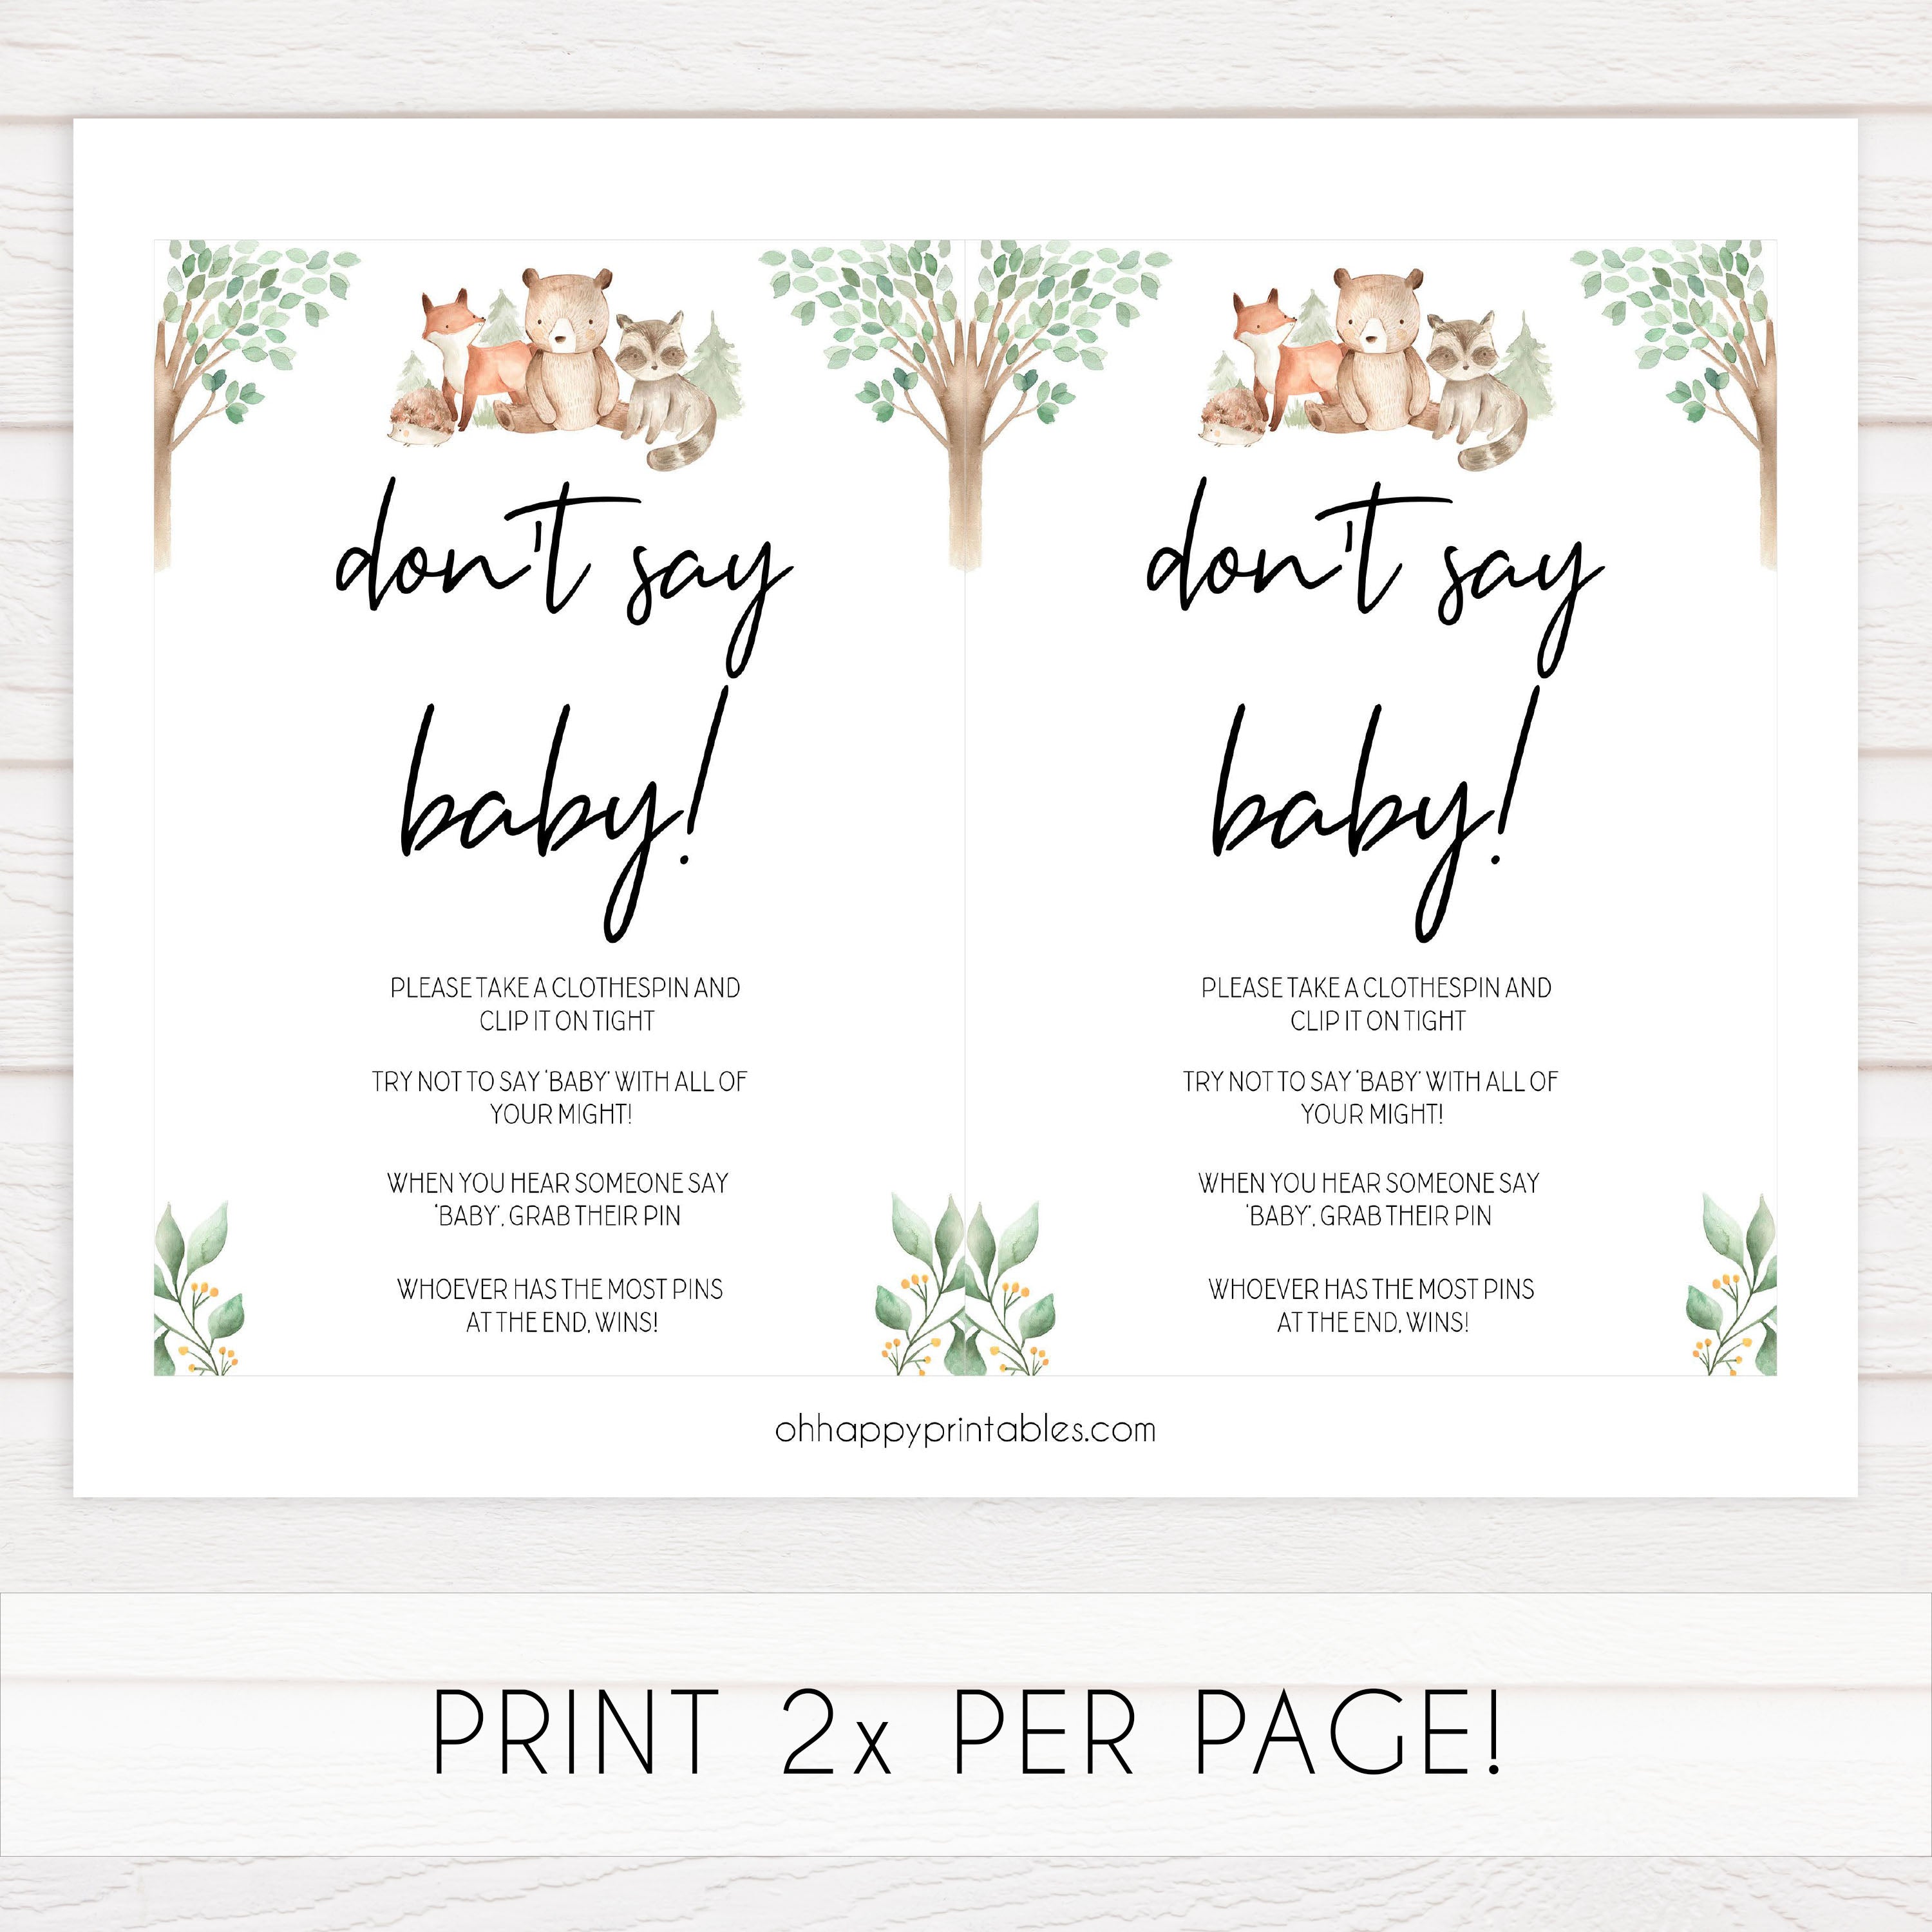 dont say baby game, Printable baby shower games, woodland animals baby games, baby shower games, fun baby shower ideas, top baby shower ideas, woodland baby shower, baby shower games, fun woodland animals baby shower ideas